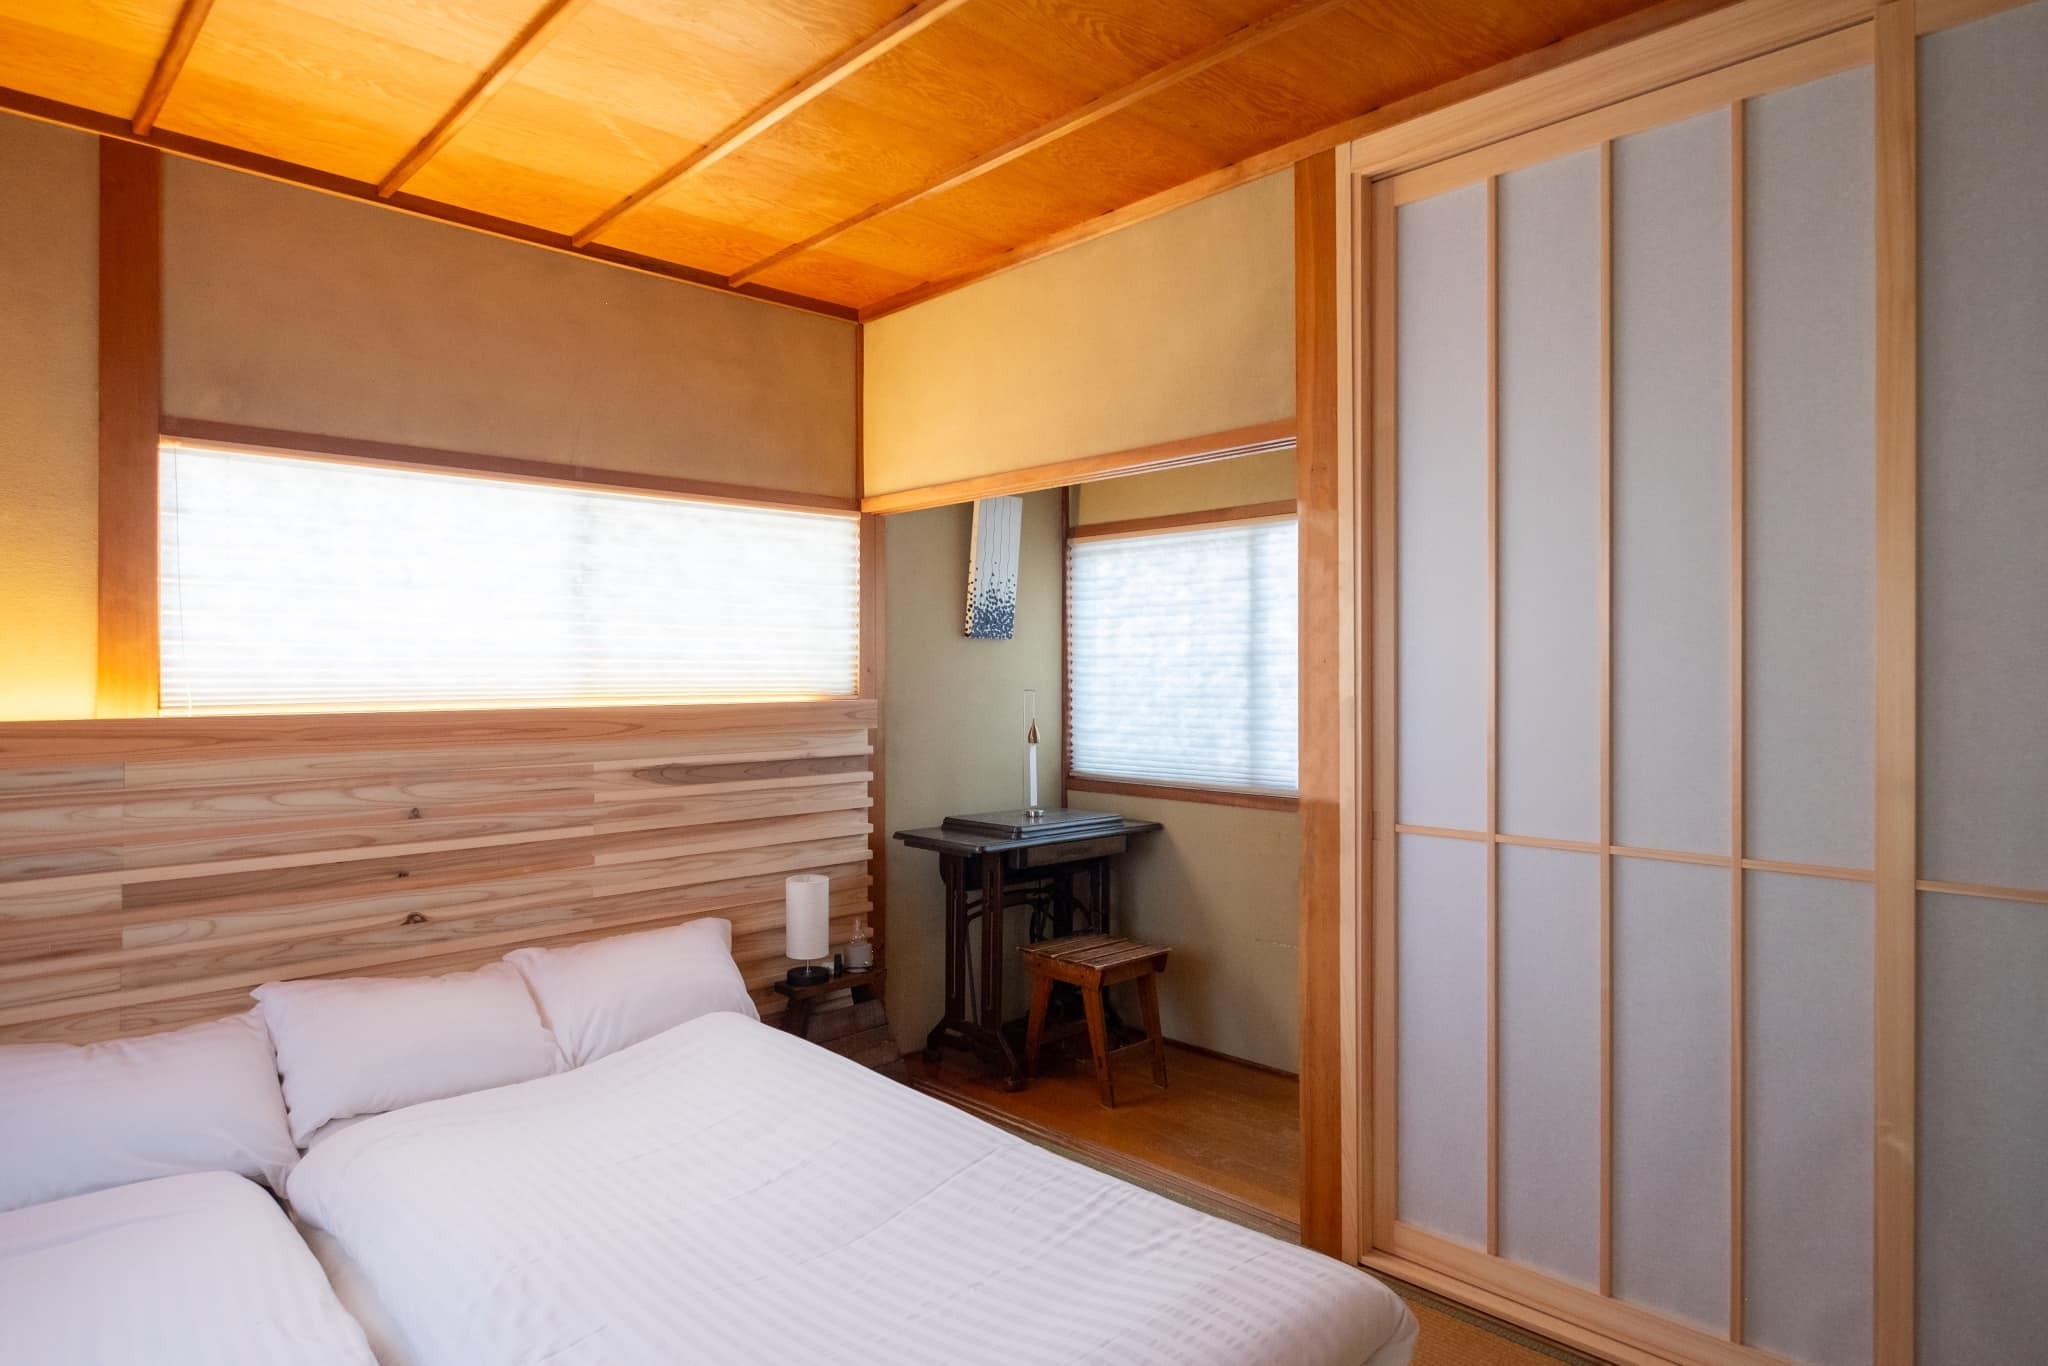 〜Private,Comfortable,Traditional, Japanese house〜